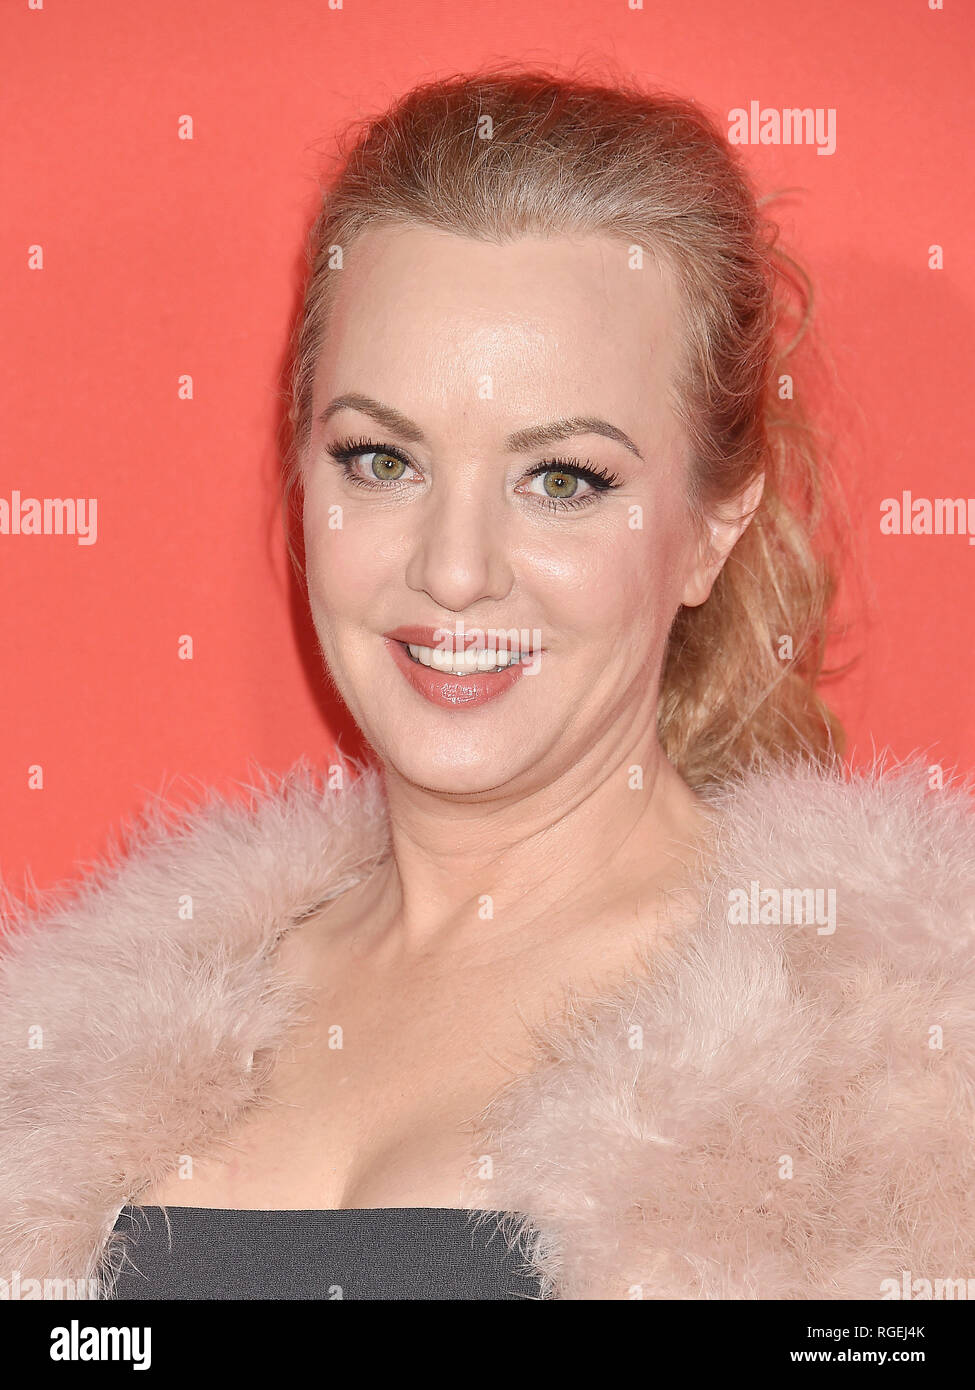 WESTWOOD, CA - JANUARY 28: Wendi McLendon-Covey arrives for Paramount Pictures' 'What Men Want' Premiere held at Regency Village Theatre on January 28, 2019 in Westwood, California. Credit: Jeffrey Mayer/Alamy Live News Stock Photo